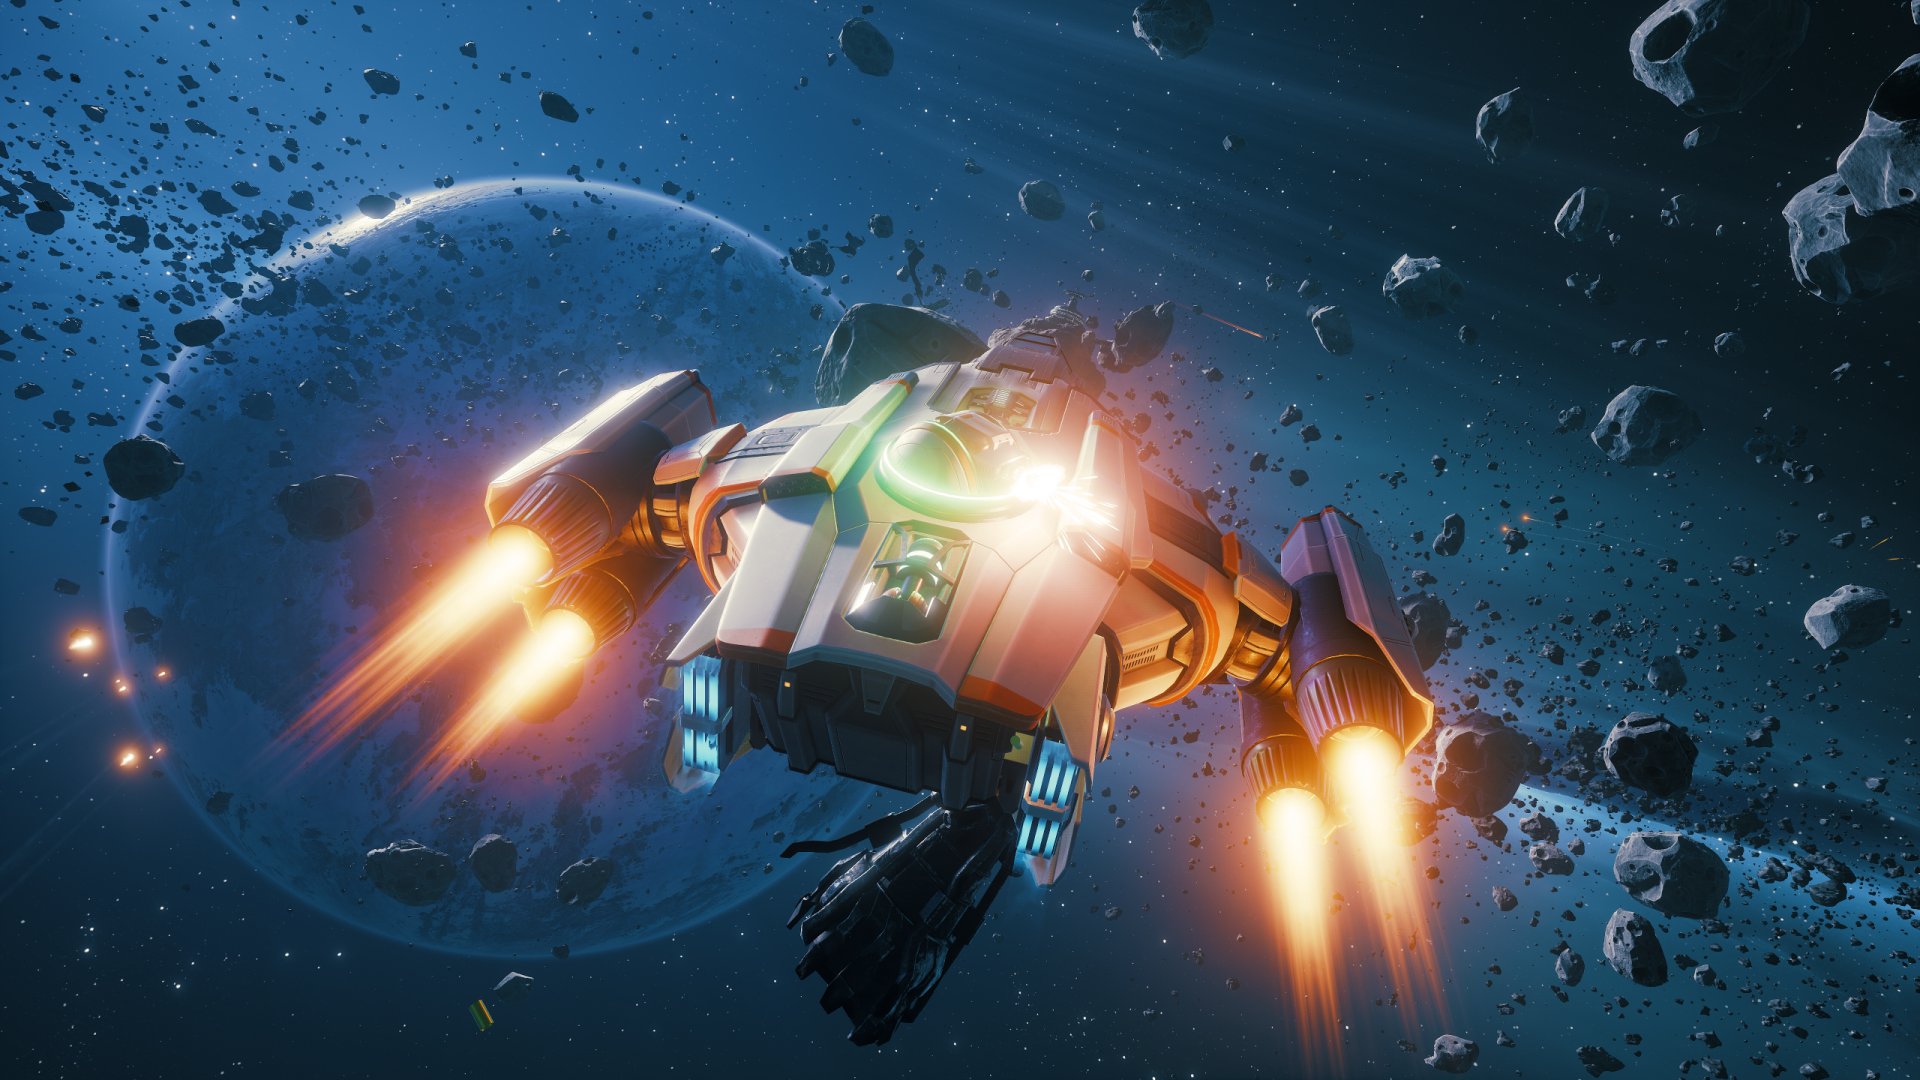 video game, everspace